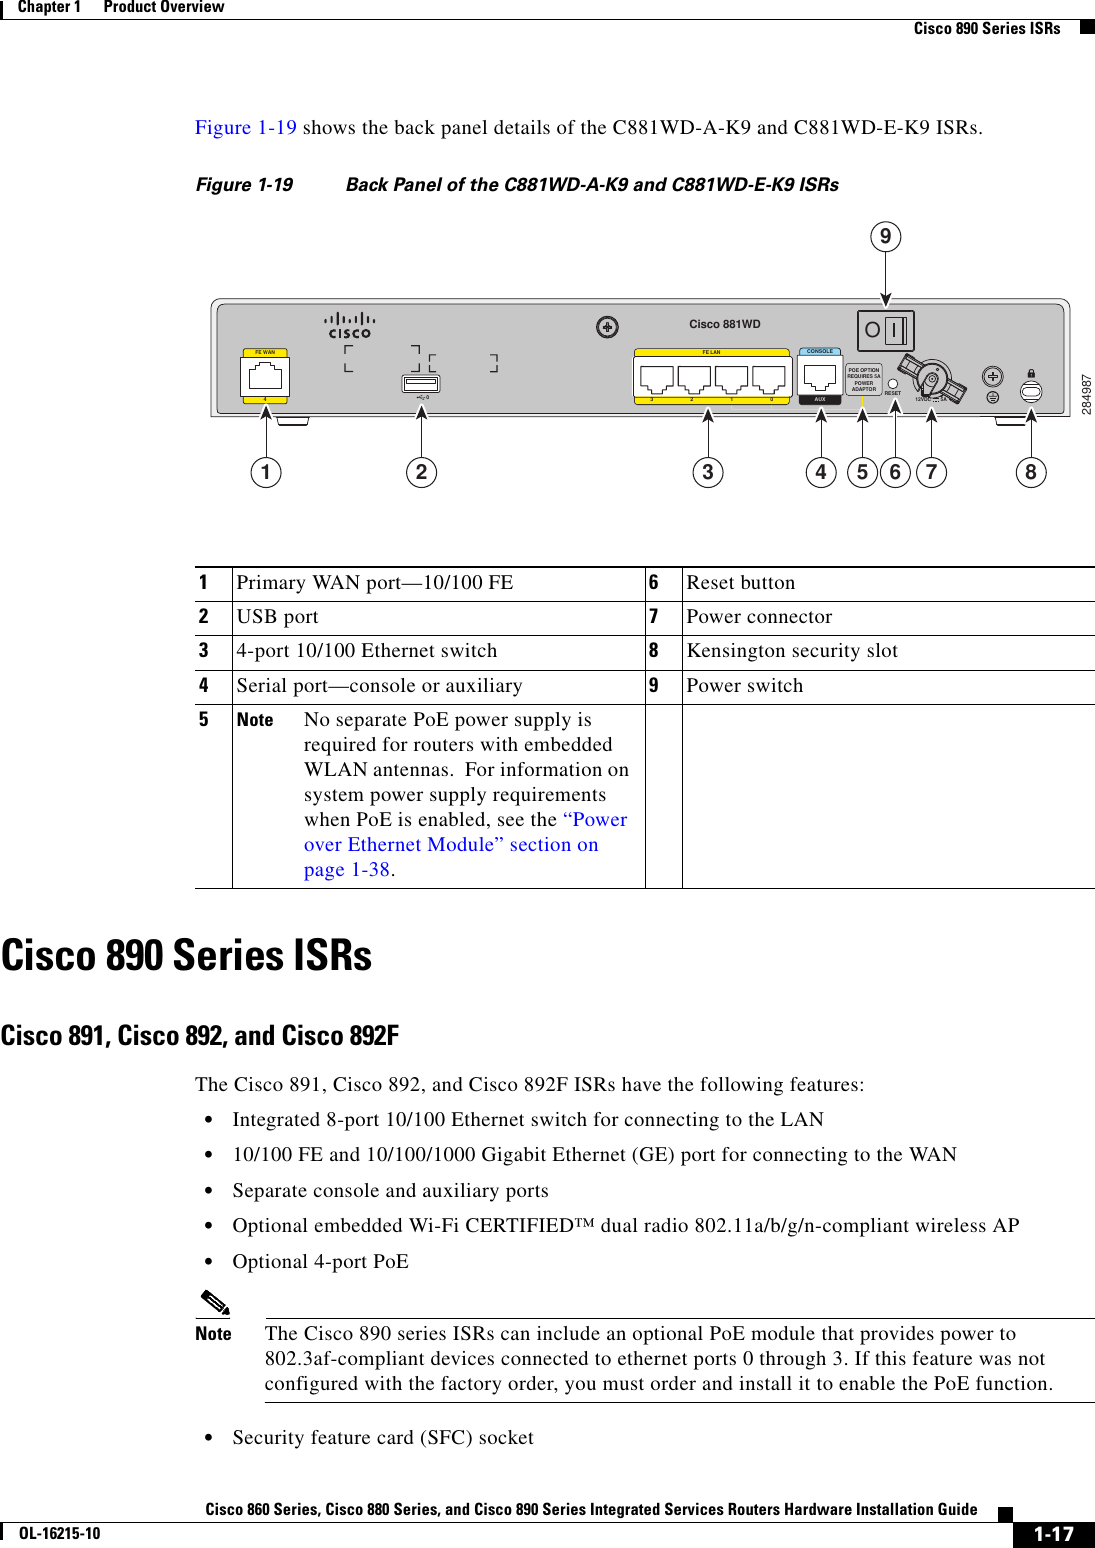  1-17Cisco 860 Series, Cisco 880 Series, and Cisco 890 Series Integrated Services Routers Hardware Installation GuideOL-16215-10Chapter 1      Product Overview  Cisco 890 Series ISRsFigure 1-19 shows the back panel details of the C881WD-A-K9 and C881WD-E-K9 ISRs.Figure 1-19 Back Panel of the C881WD-A-K9 and C881WD-E-K9 ISRsCisco 890 Series ISRsCisco 891, Cisco 892, and Cisco 892FThe Cisco 891, Cisco 892, and Cisco 892F ISRs have the following features:  • Integrated 8-port 10/100 Ethernet switch for connecting to the LAN  • 10/100 FE and 10/100/1000 Gigabit Ethernet (GE) port for connecting to the WAN  • Separate console and auxiliary ports  • Optional embedded Wi-Fi CERTIFIED™ dual radio 802.11a/b/g/n-compliant wireless AP  • Optional 4-port PoENote The Cisco 890 series ISRs can include an optional PoE module that provides power to 802.3af-compliant devices connected to ethernet ports 0 through 3. If this feature was not configured with the factory order, you must order and install it to enable the PoE function.  • Security feature card (SFC) socket284987Cisco 881WDAUXCONSOLEFE LANPOE OPTIONREQUIRES 5APOWERADAPTOR3210RESET 12VDC 5A0OFE WAN4921 3 4 5 6 7 81Primary WAN port—10/100 FE 6Reset button2USB port 7Power connector34-port 10/100 Ethernet switch 8Kensington security slot4Serial port—console or auxiliary 9Power switch5Note No separate PoE power supply is required for routers with embedded WLAN antennas.  For information on system power supply requirements when PoE is enabled, see the “Power over Ethernet Module” section on page 1-38.